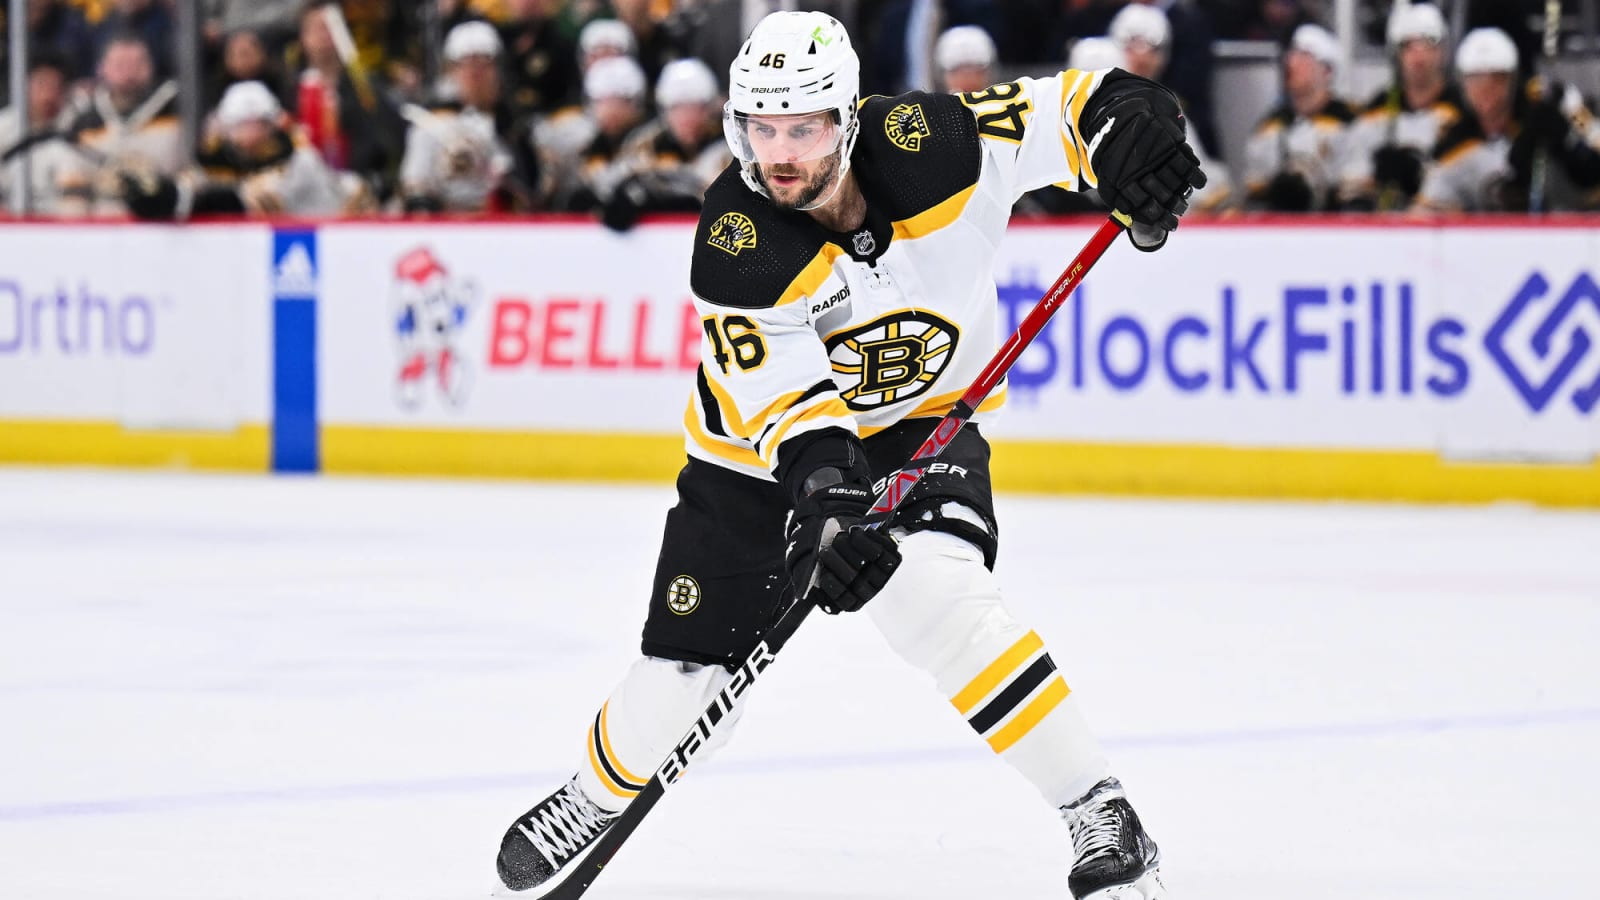 Bruins: Top 5 Moments From the 2022-23 Regular Season